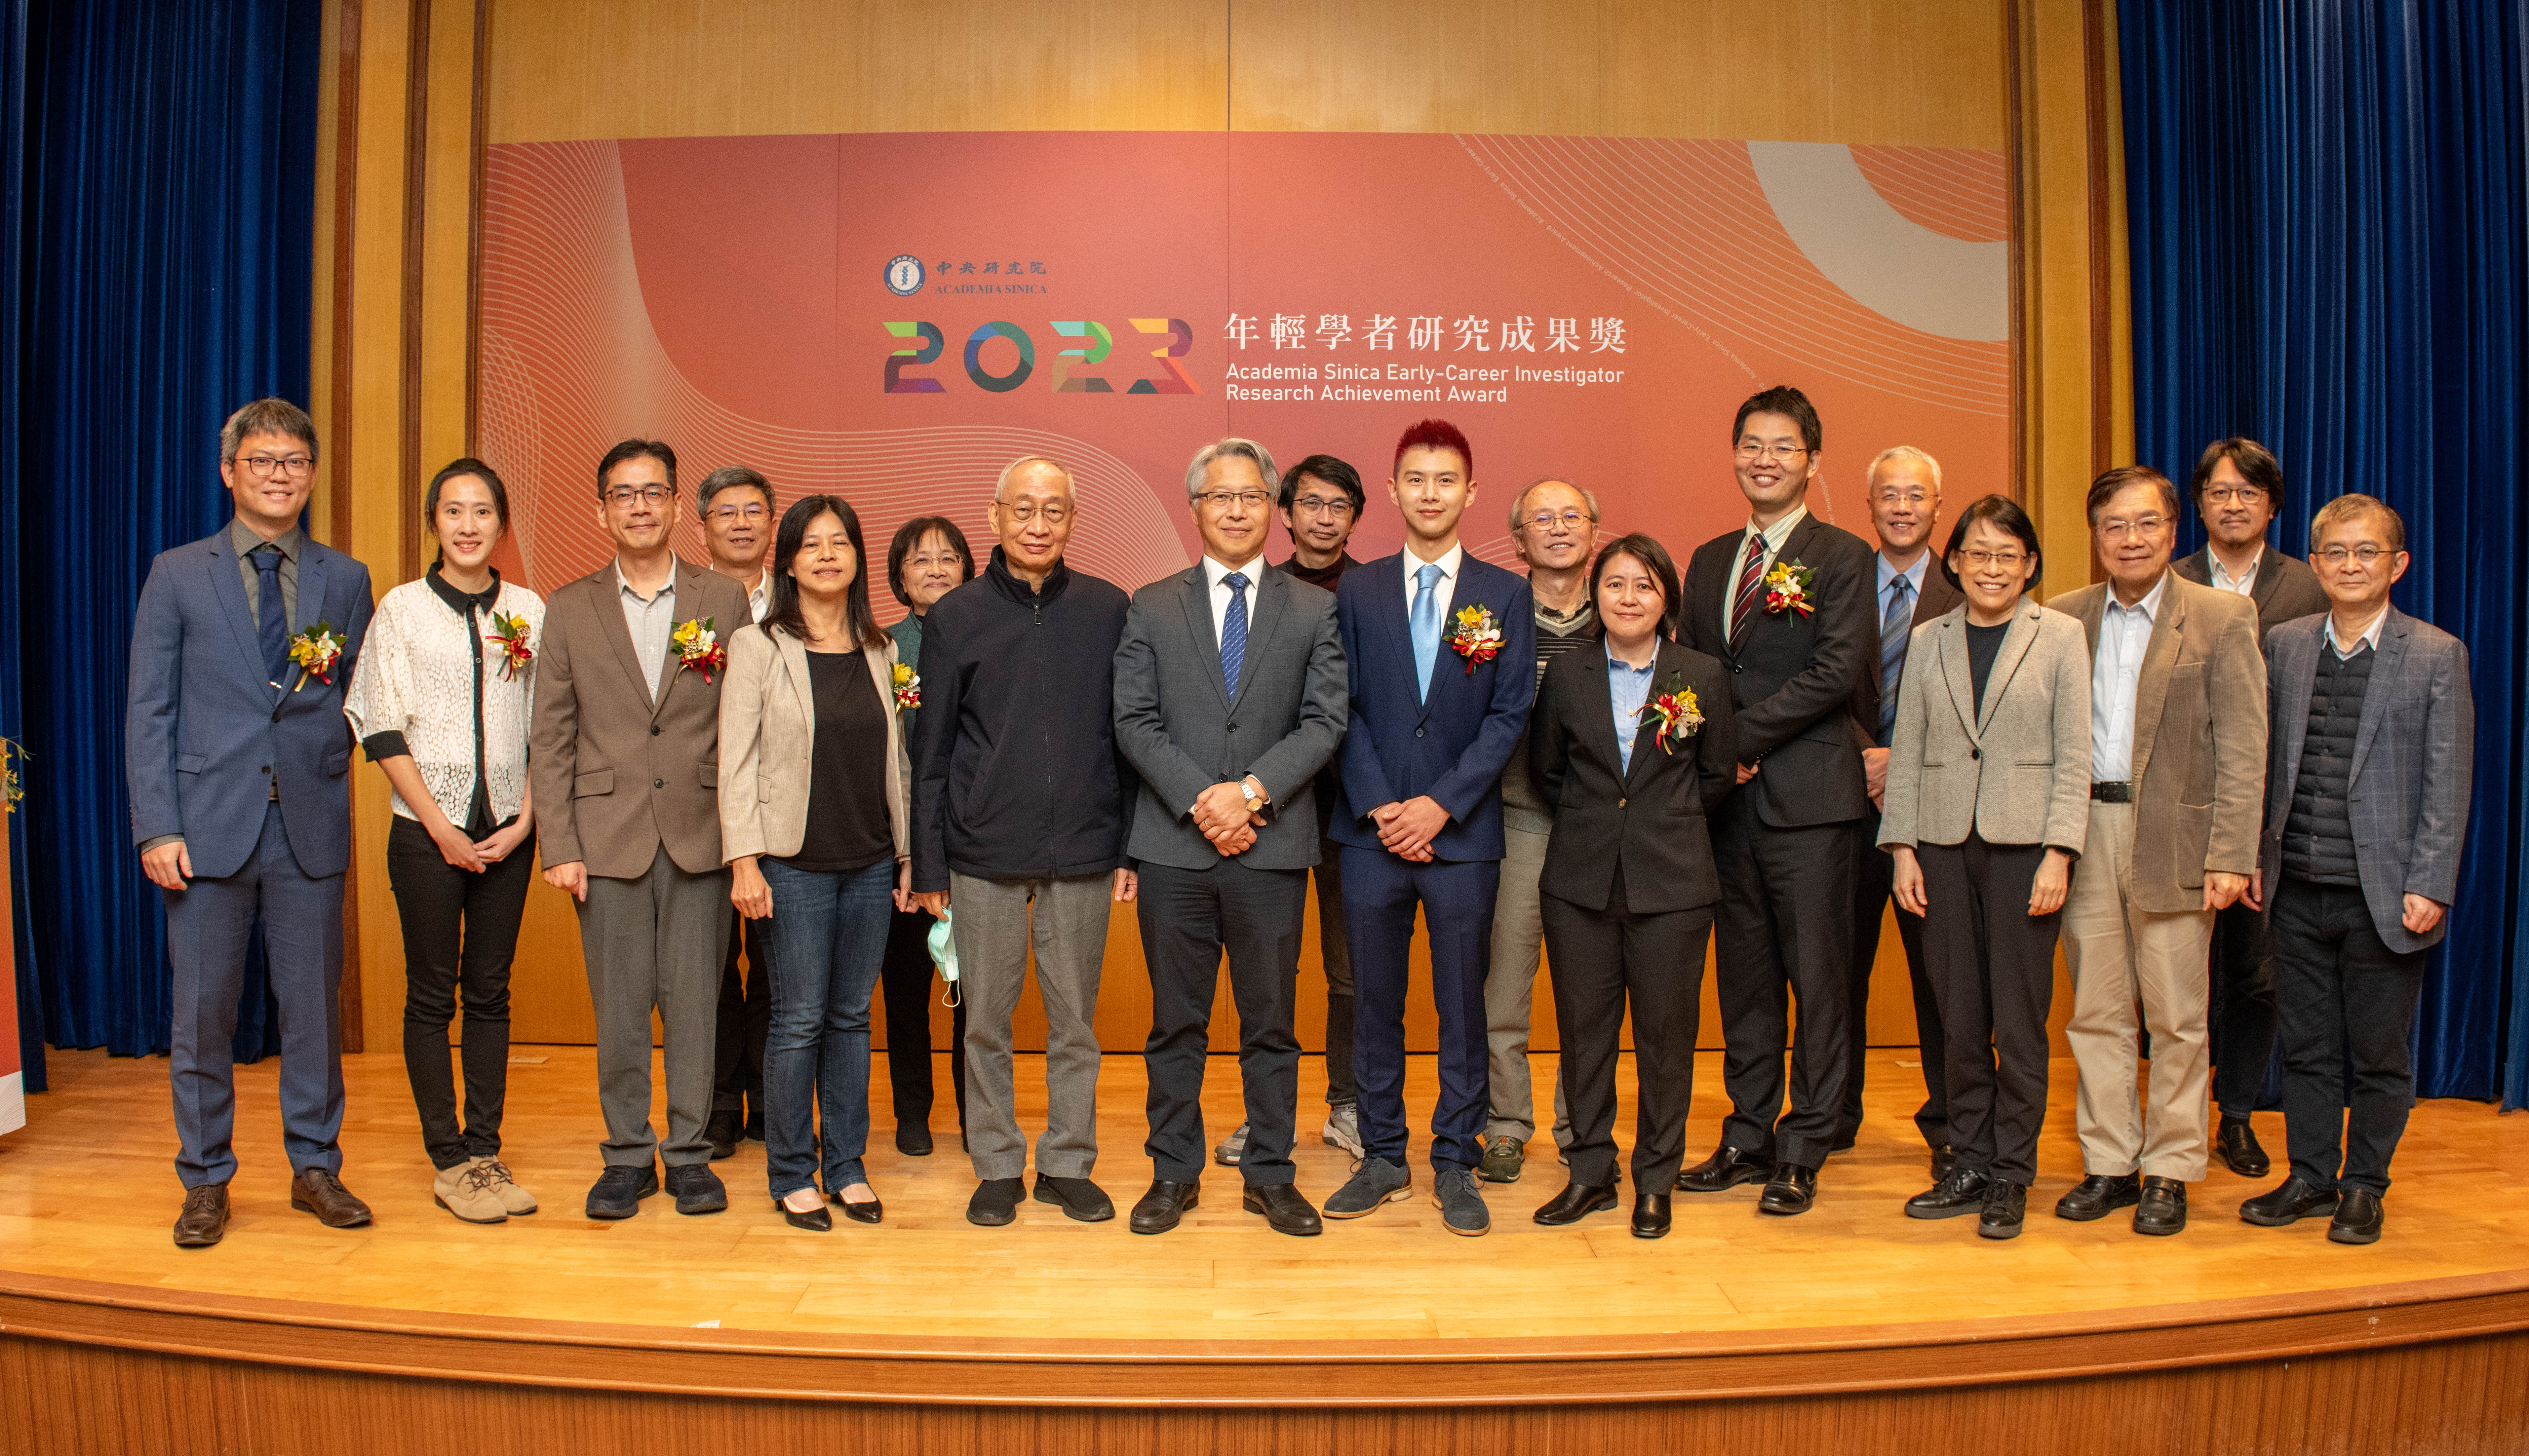 【Press Releases】Awards Ceremony for the 2023 Academia Sinica Early-Career Investigator Research Achievement Award